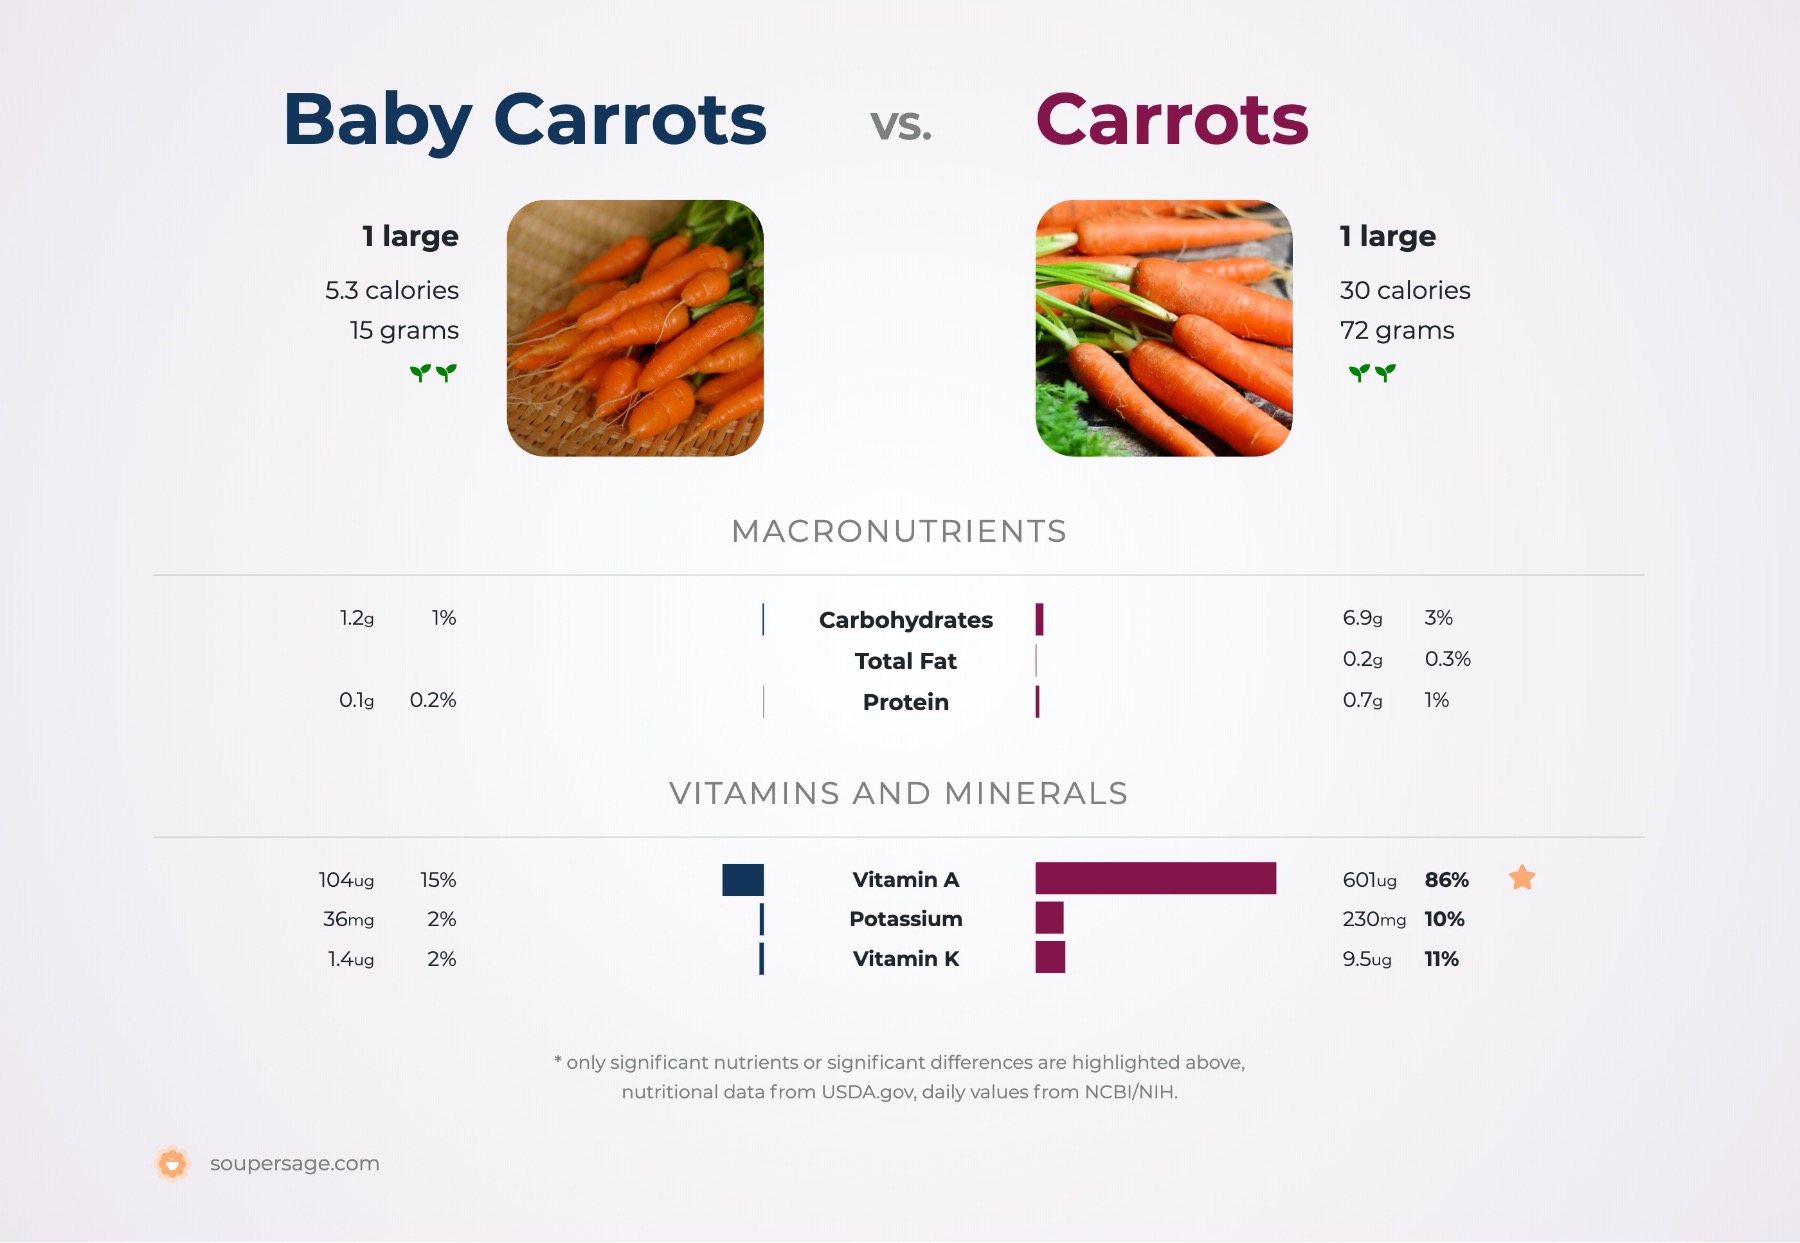 how many baby carrots equal one carrot